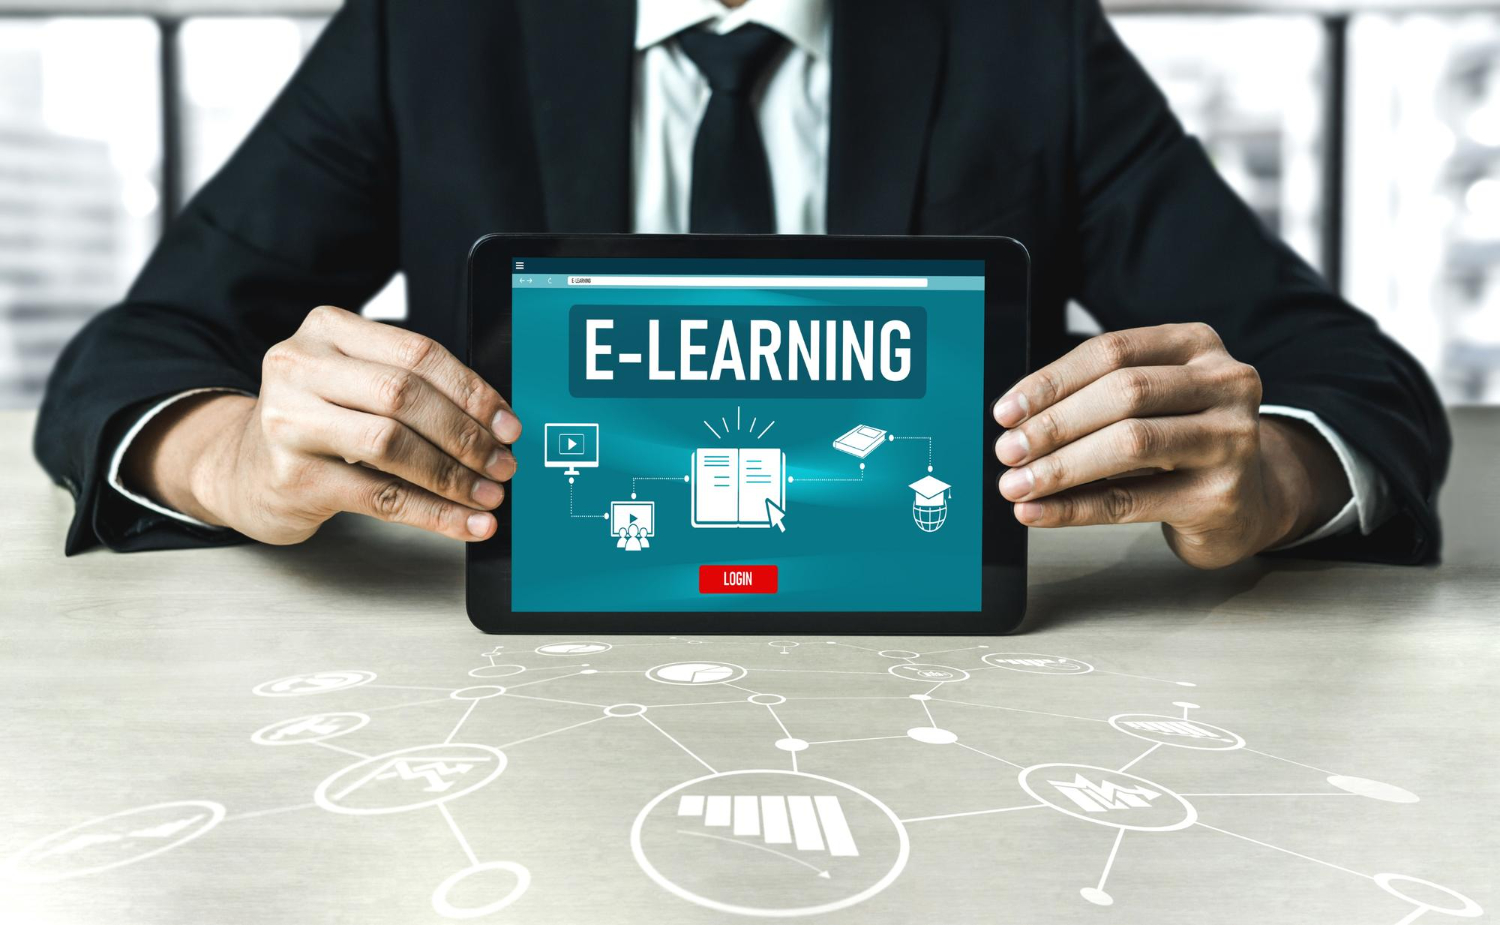 What are the Various Use Cases of a Learning Management System?